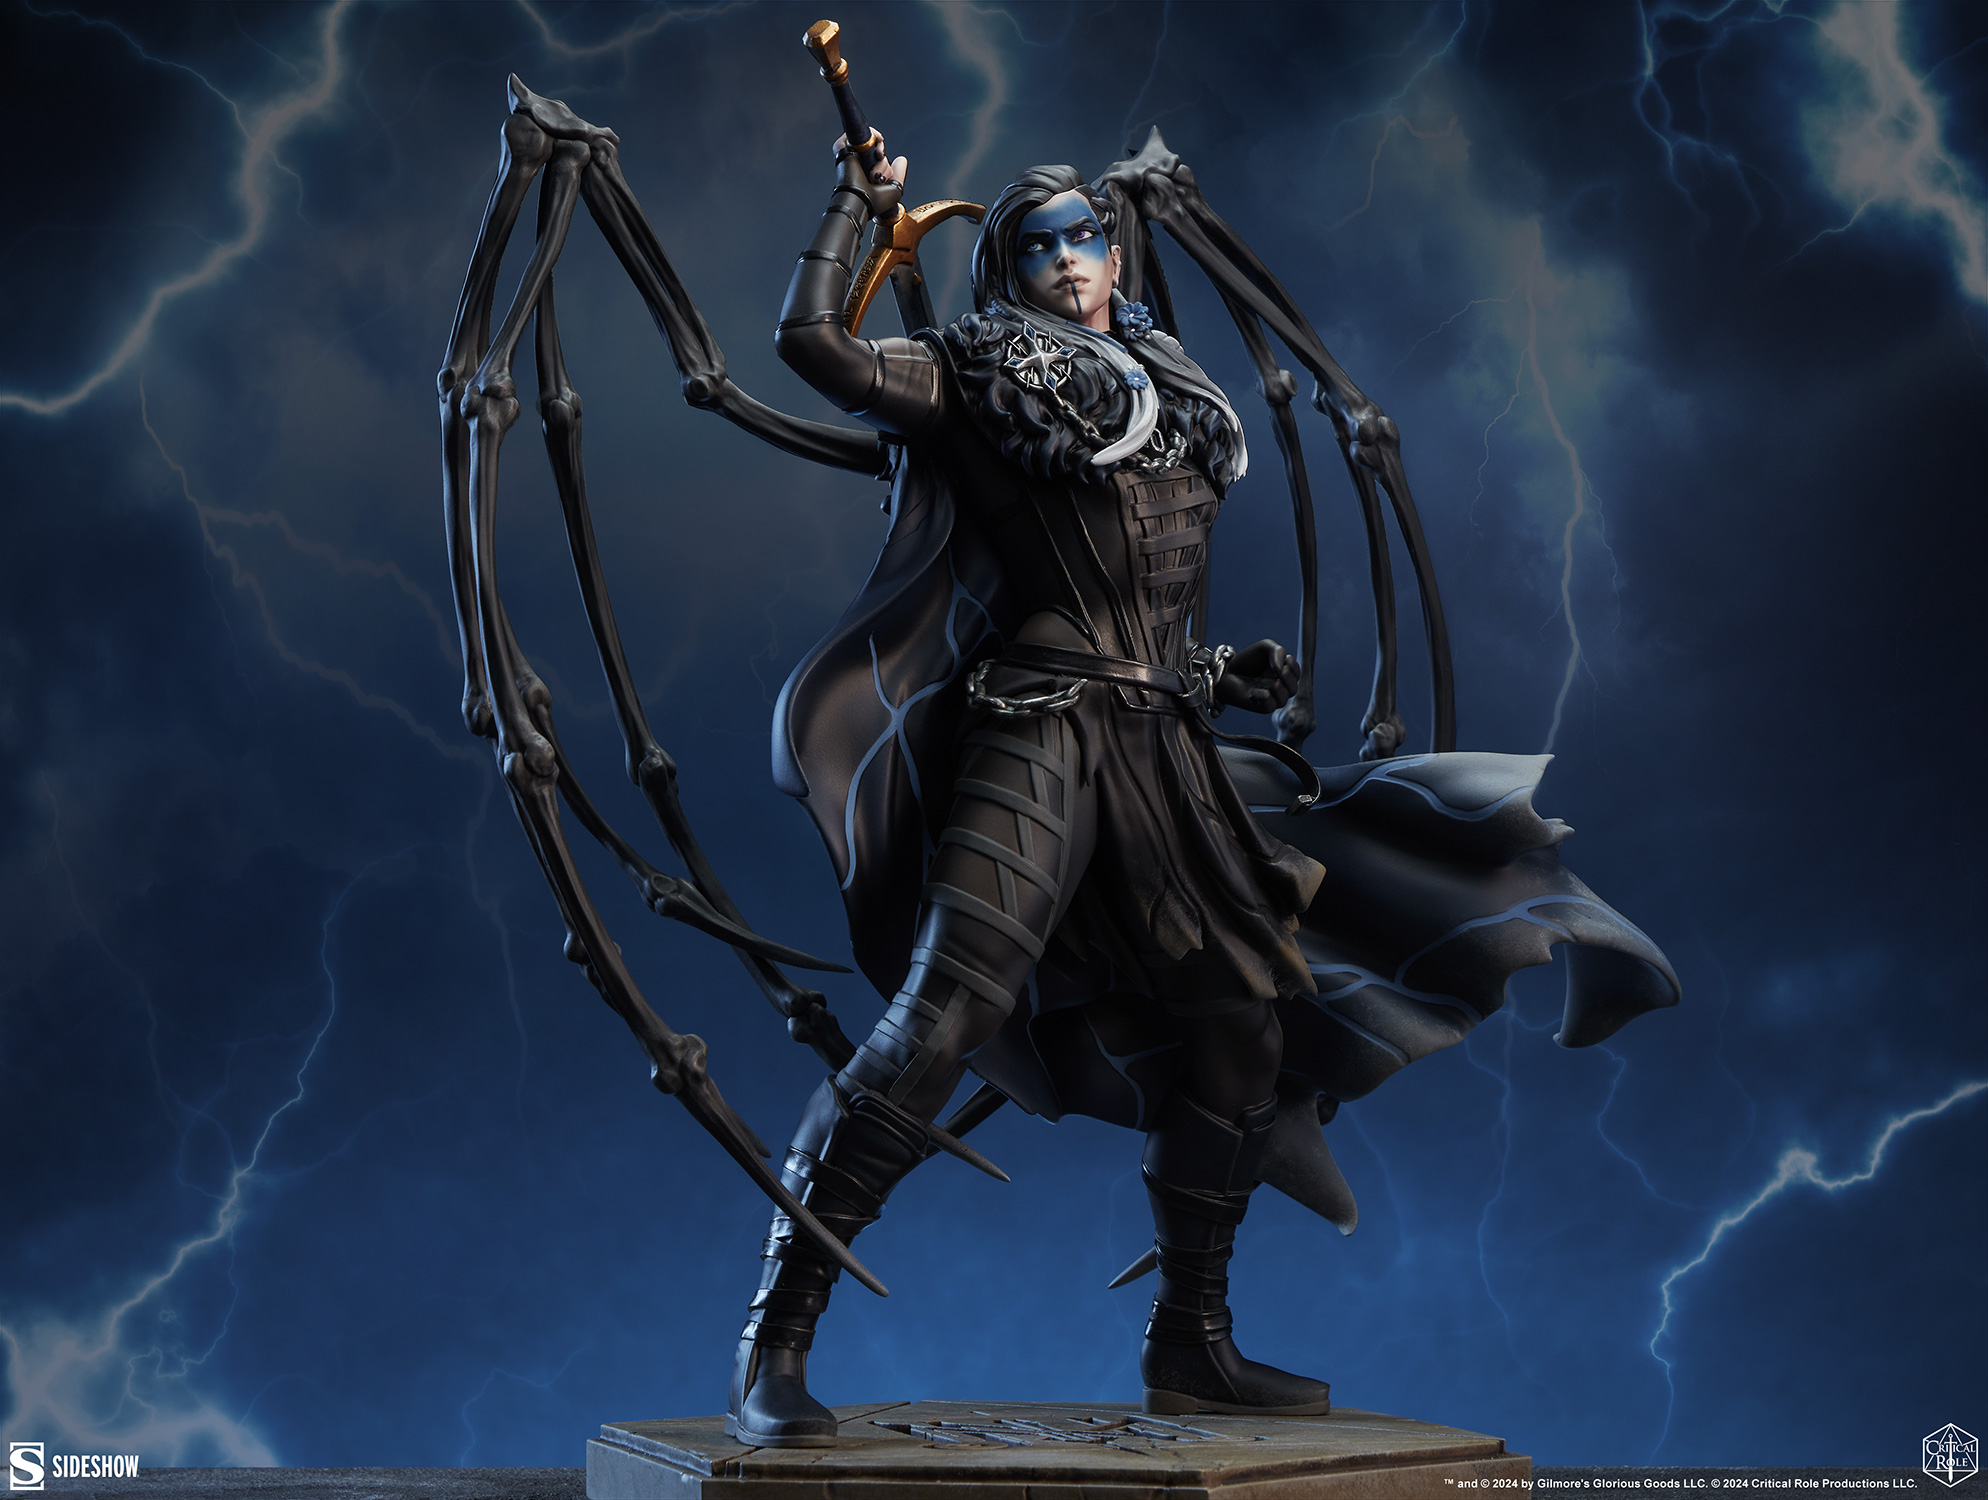 Pre-Order Sideshow Critical Role Yasha Nydoorin Mighty Nein Statue